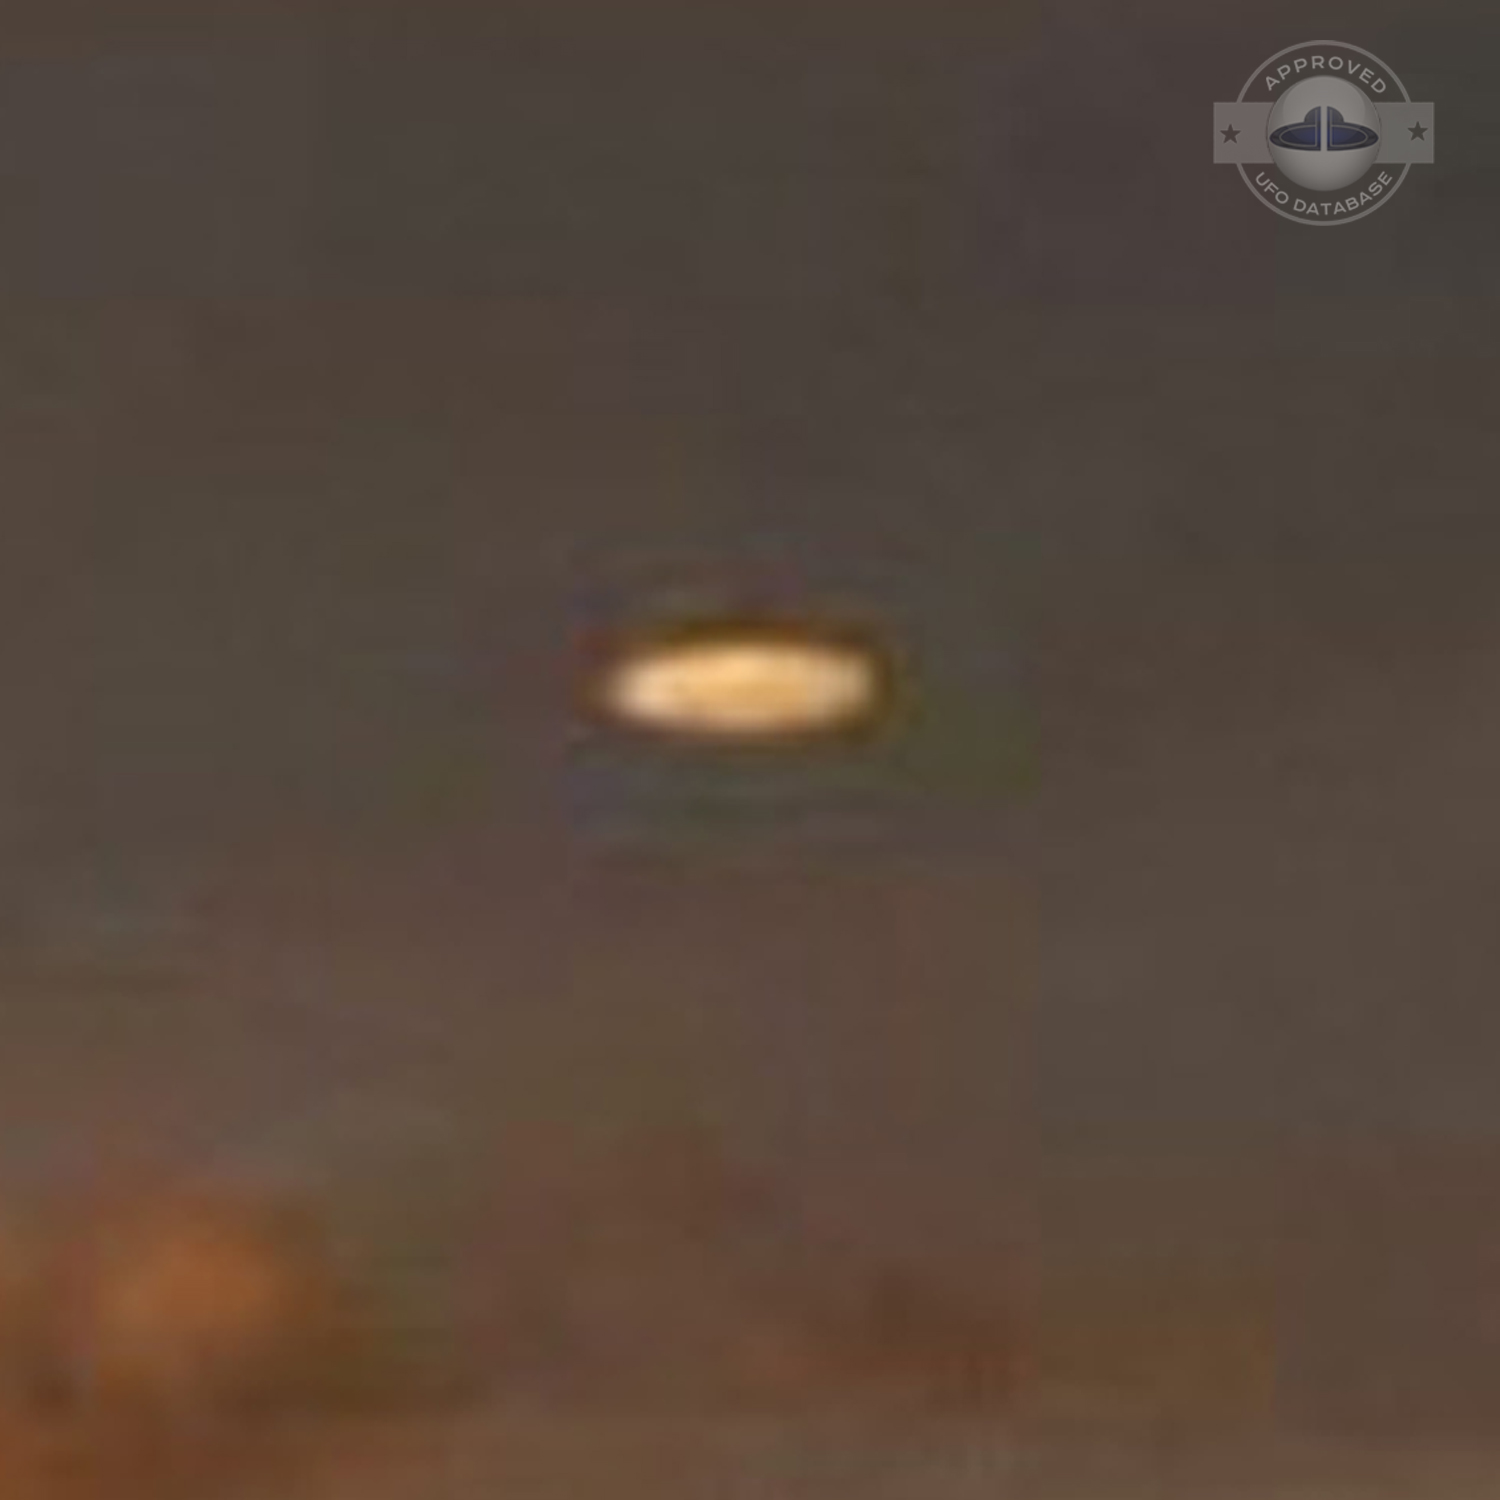 UFO picture showing a bright flat round disc passing near a building UFO Picture #54-5